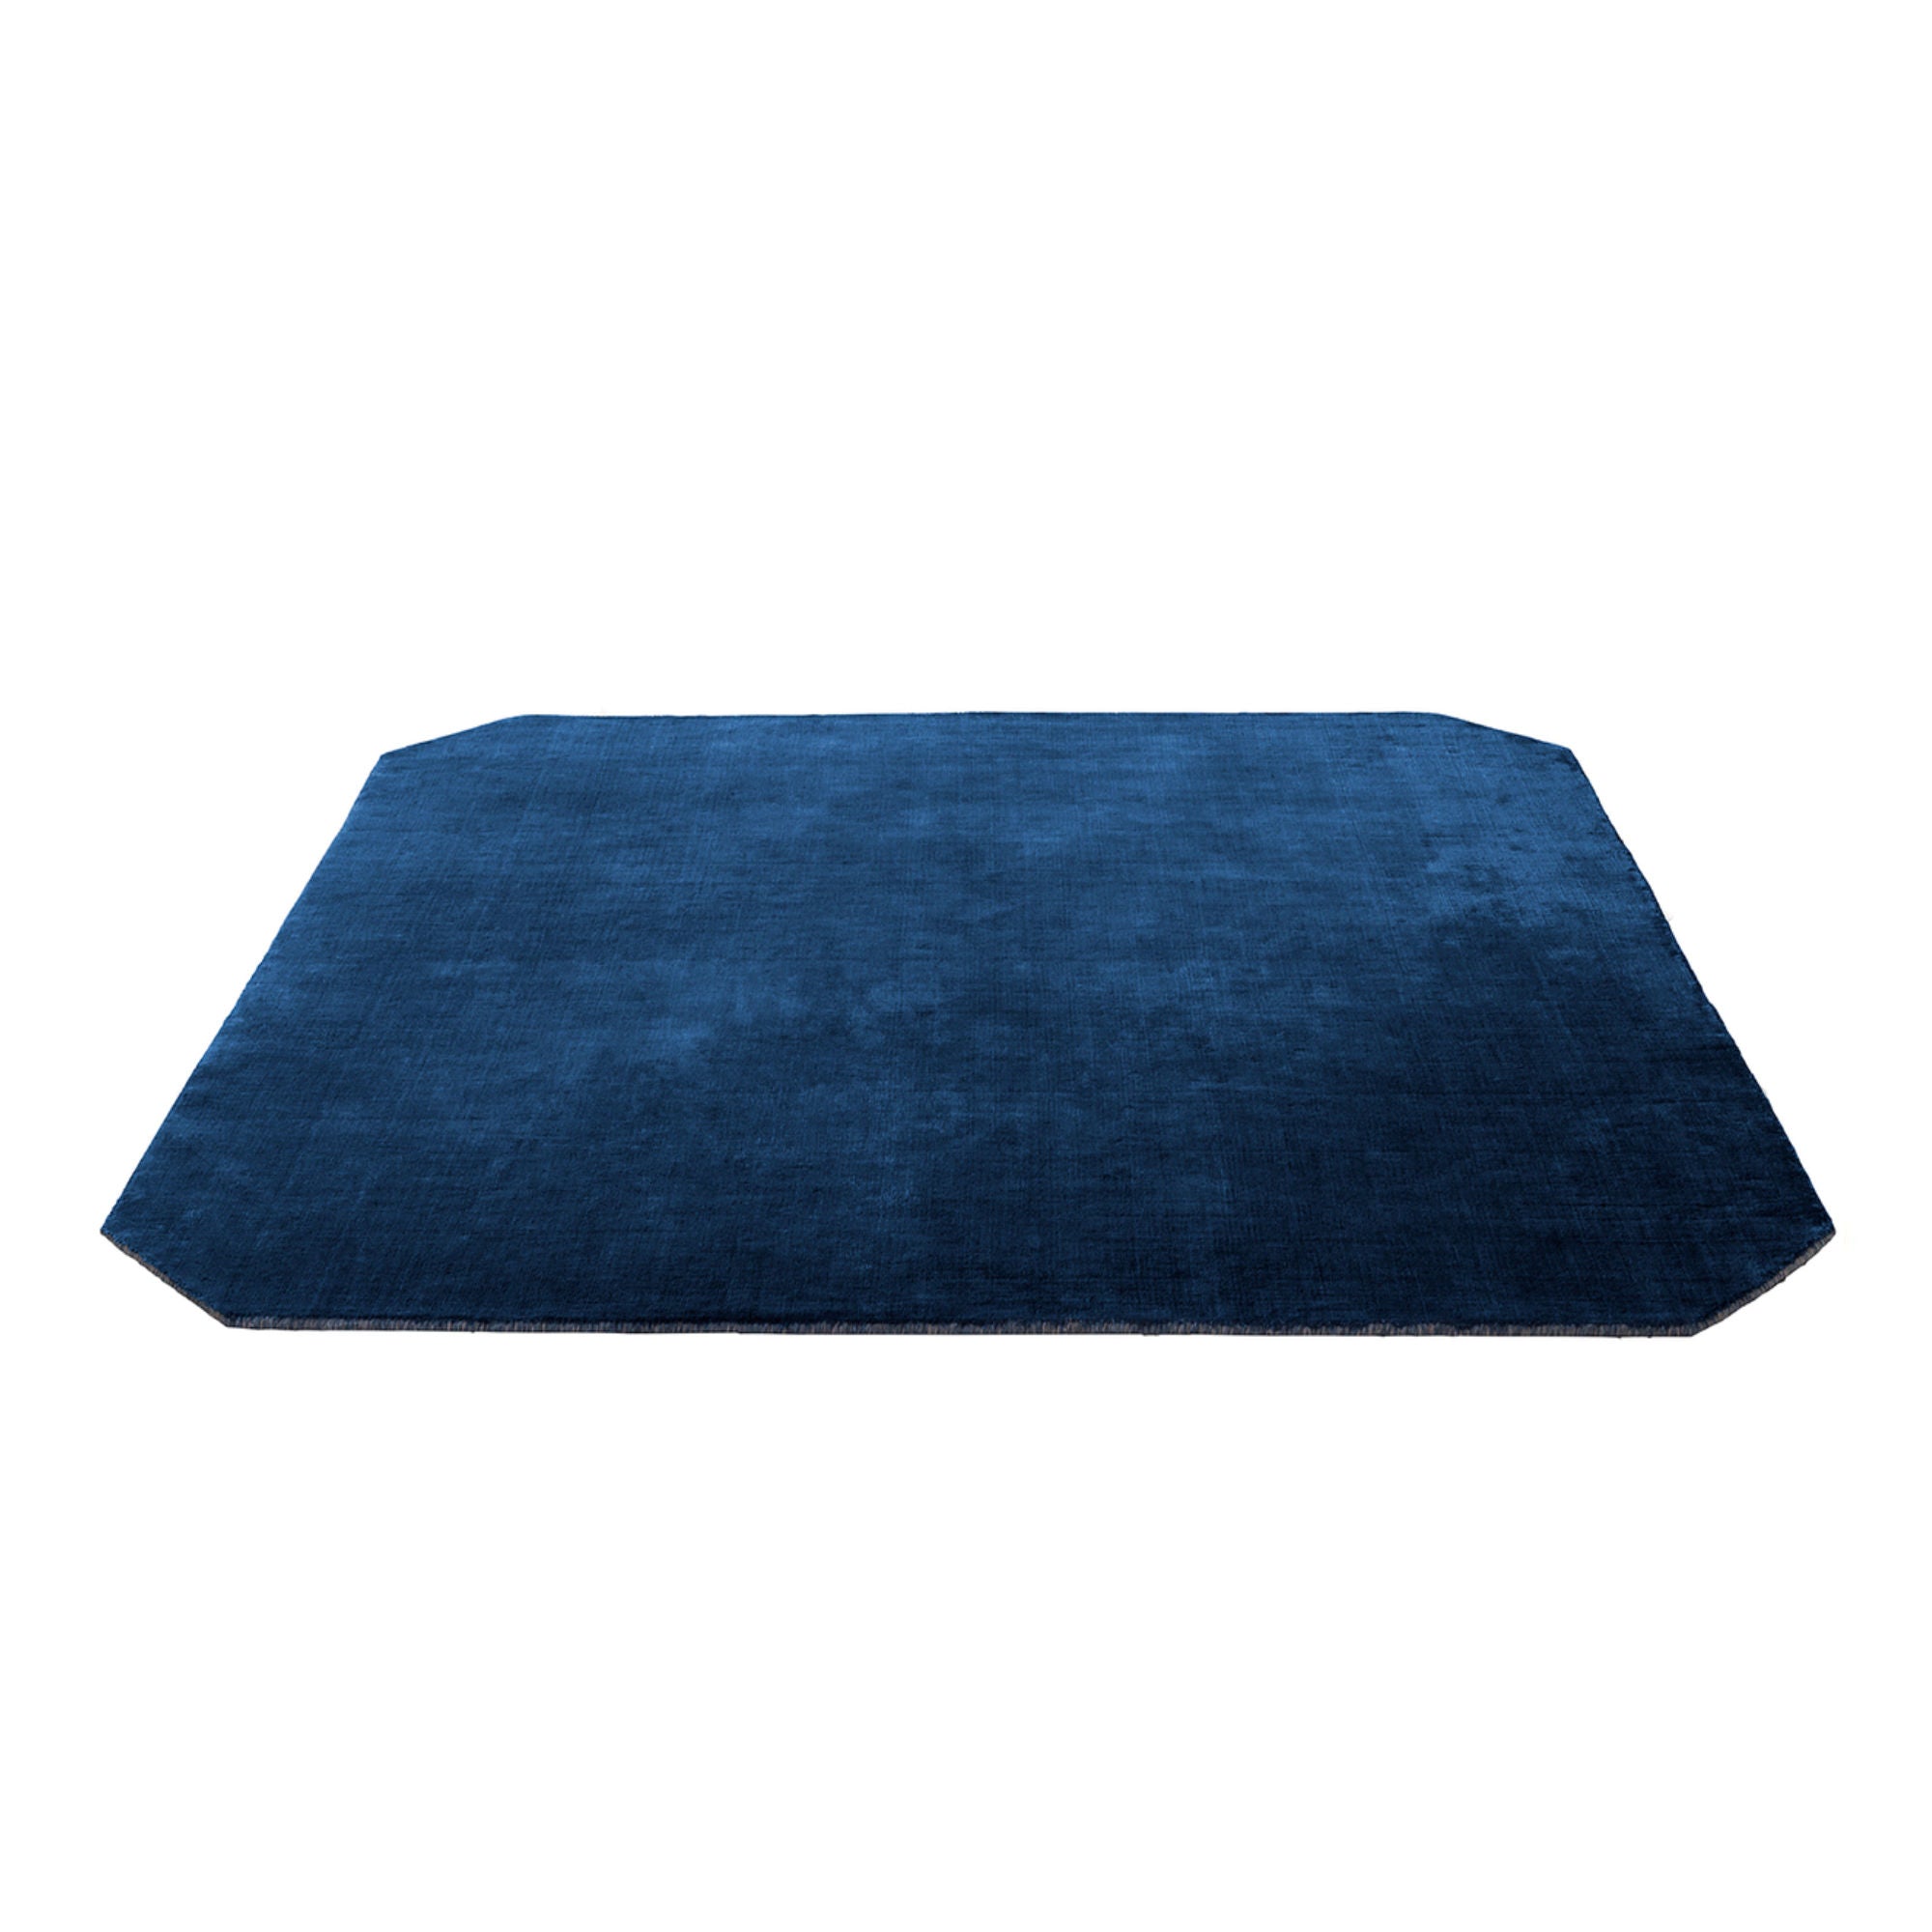 &Tradition AP6 The Moor Rug , blue midnight (240x240 cm)